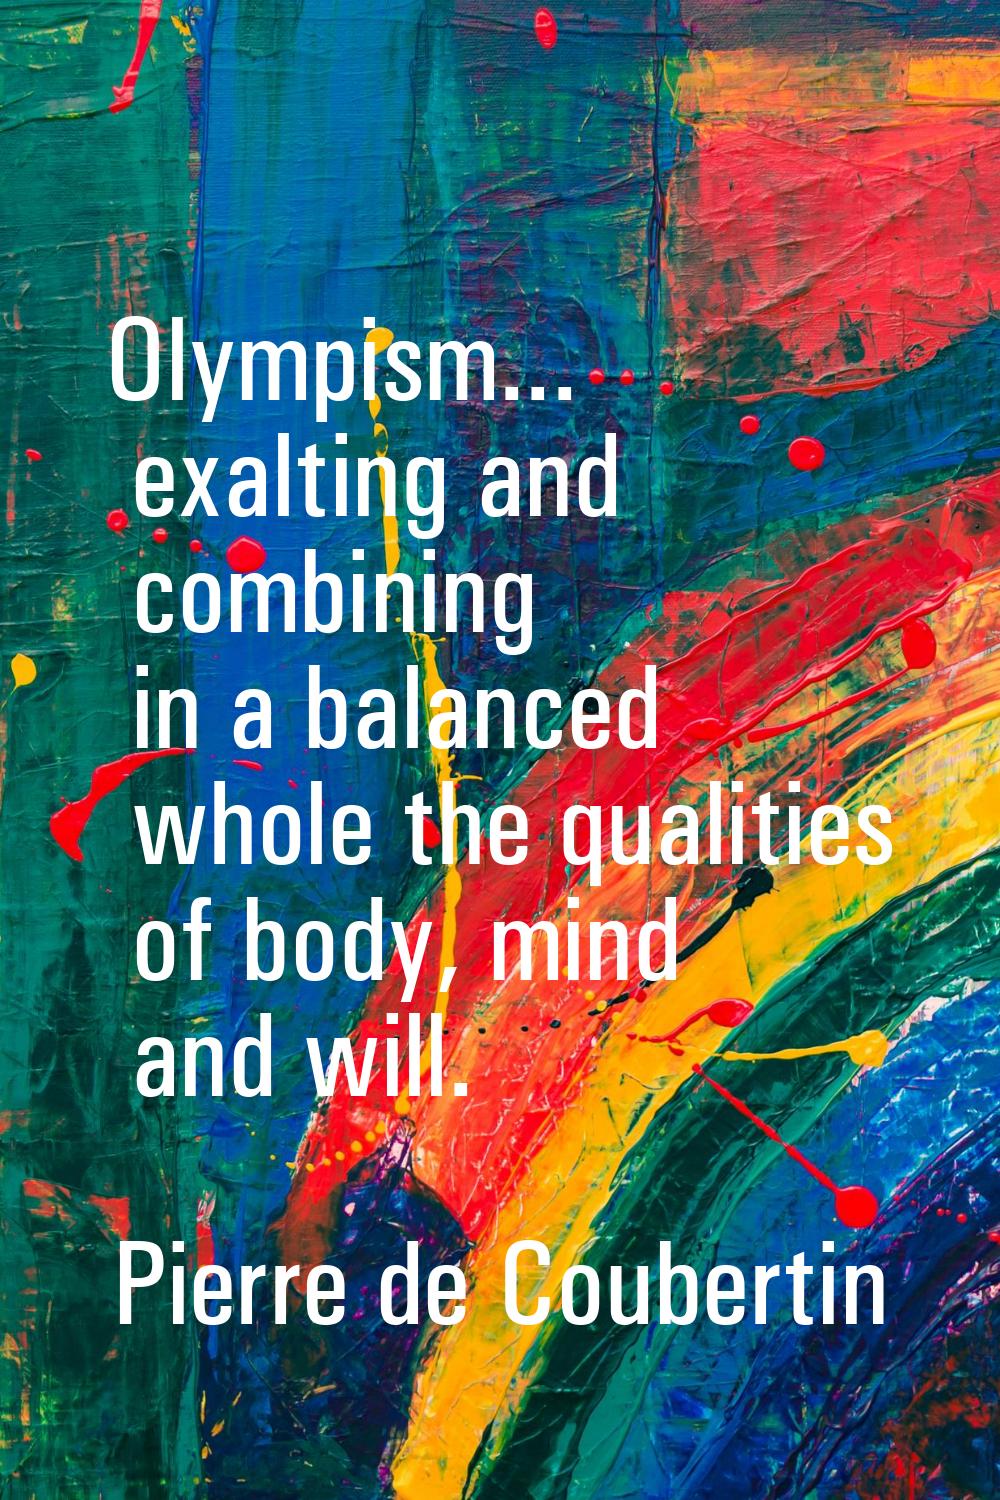 Olympism... exalting and combining in a balanced whole the qualities of body, mind and will.